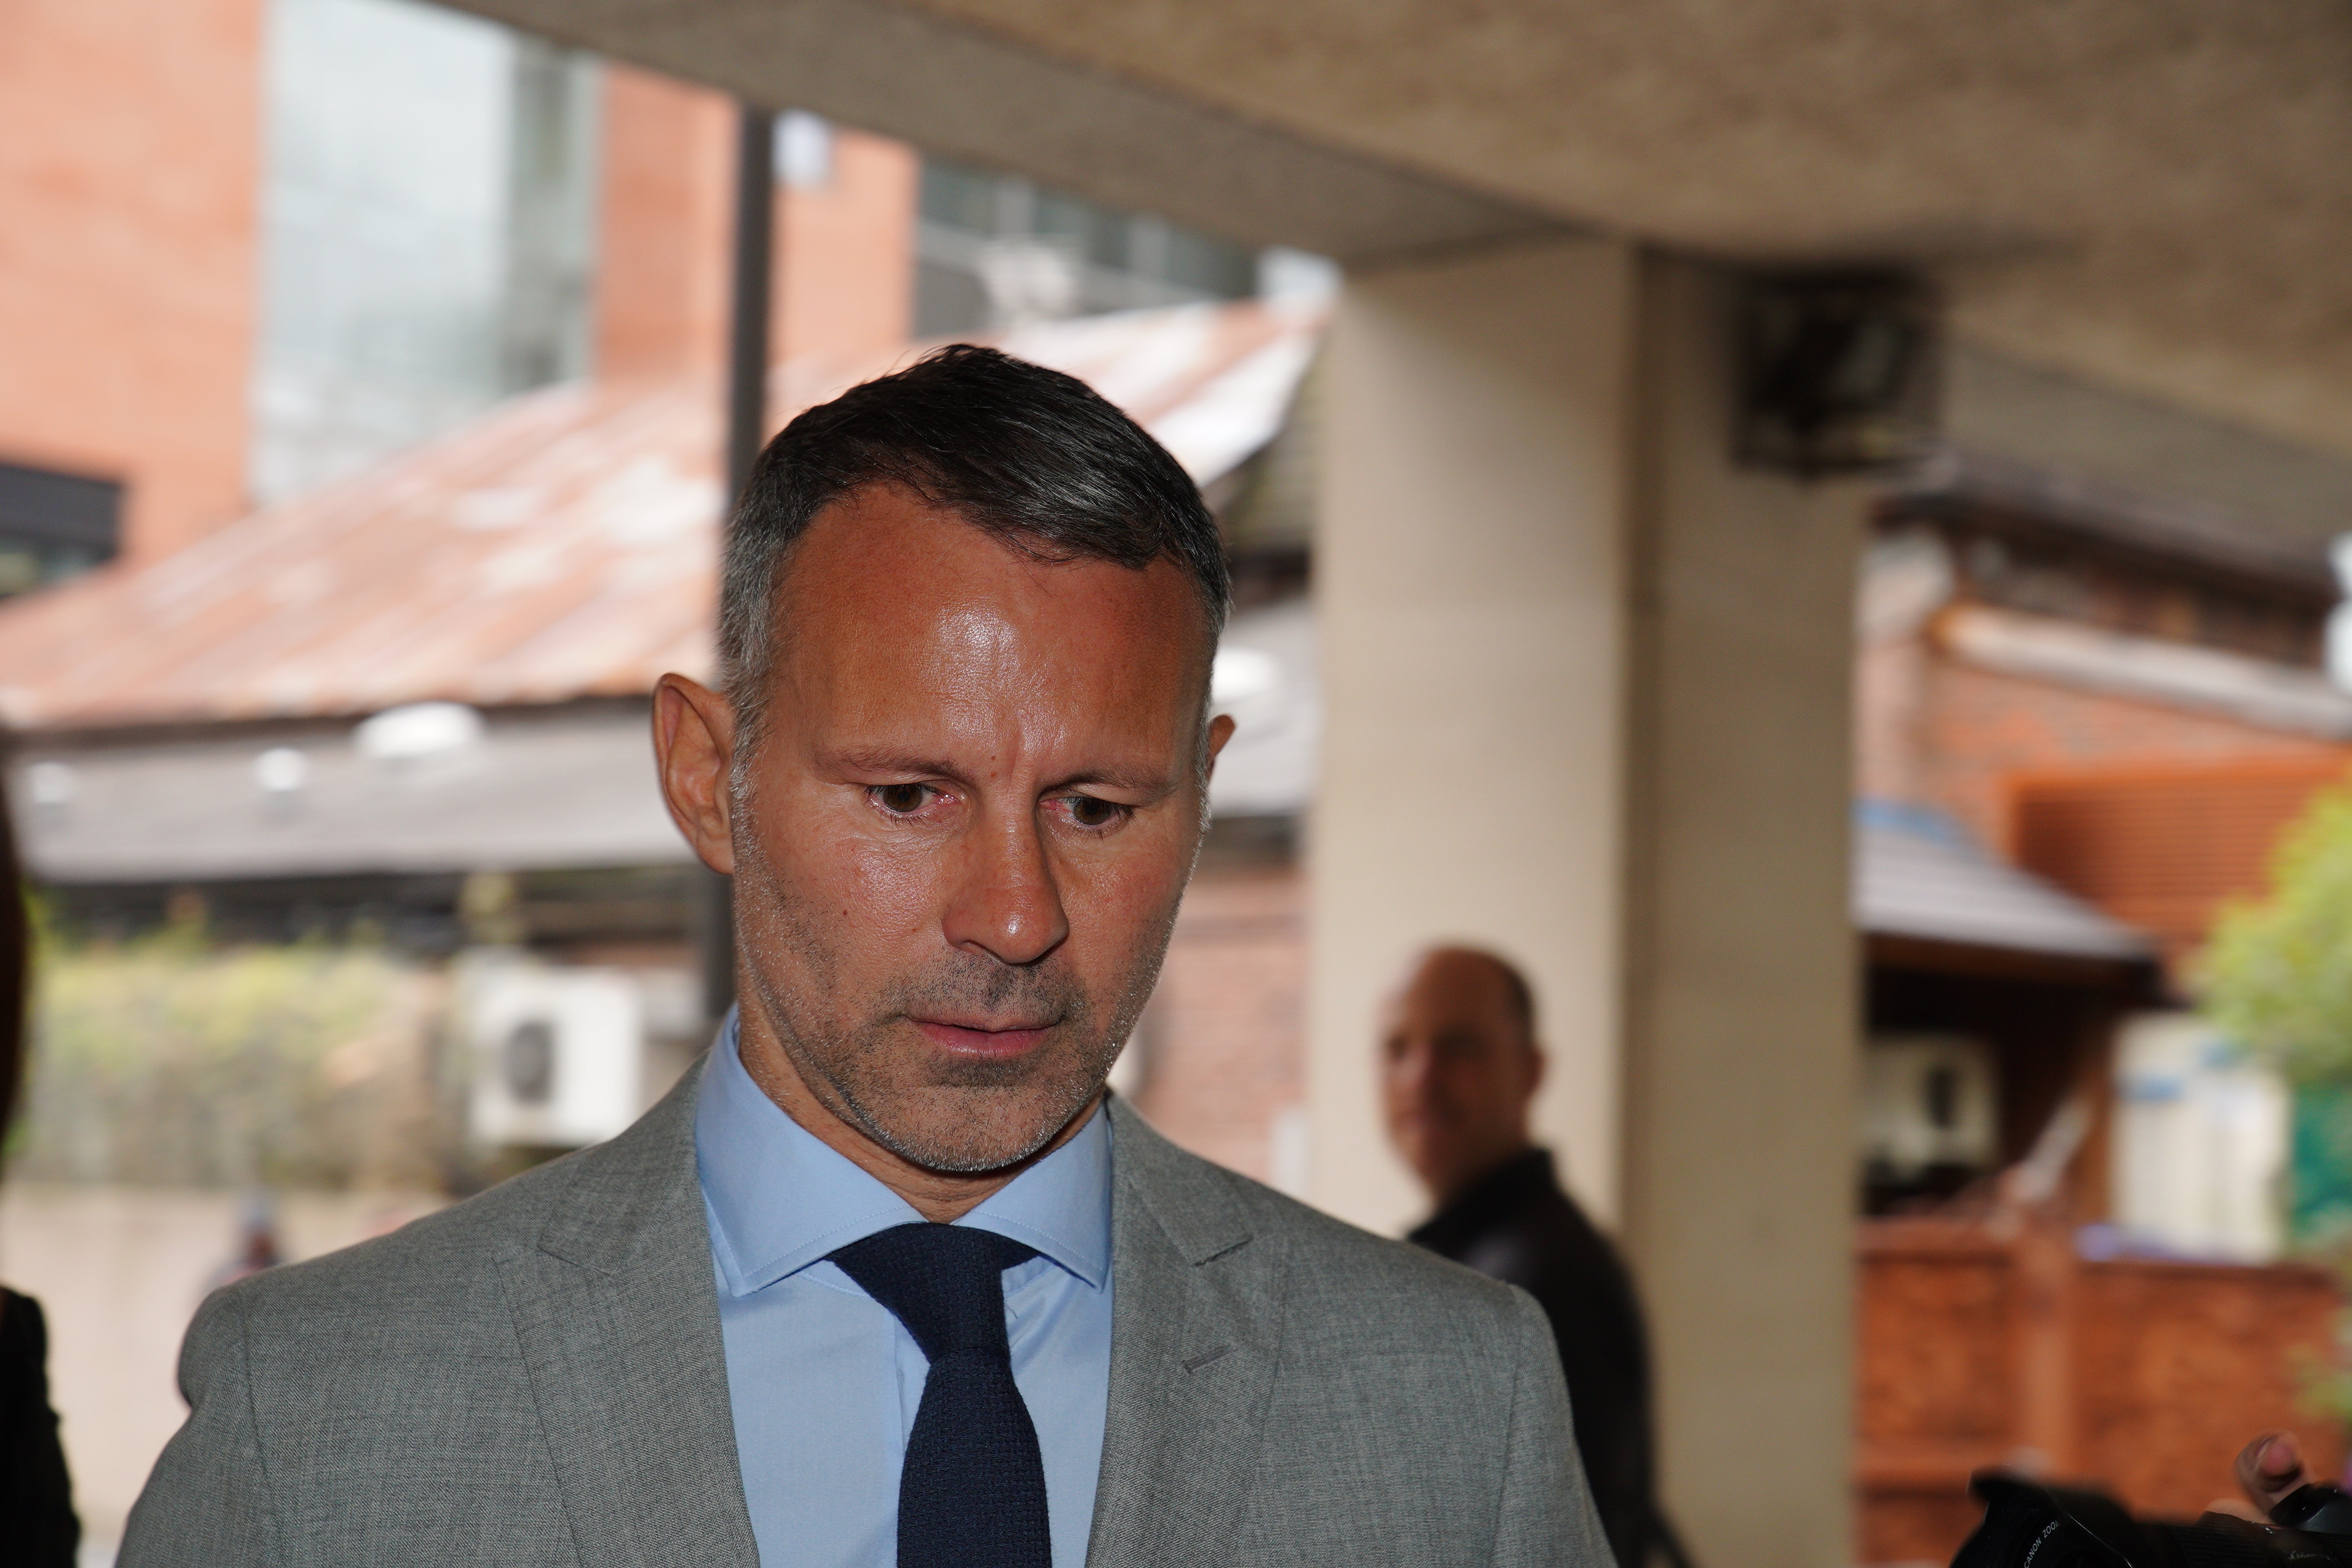 Giggs enjoyed rough sex life with ex who accuses him of assault, jury told The Independent